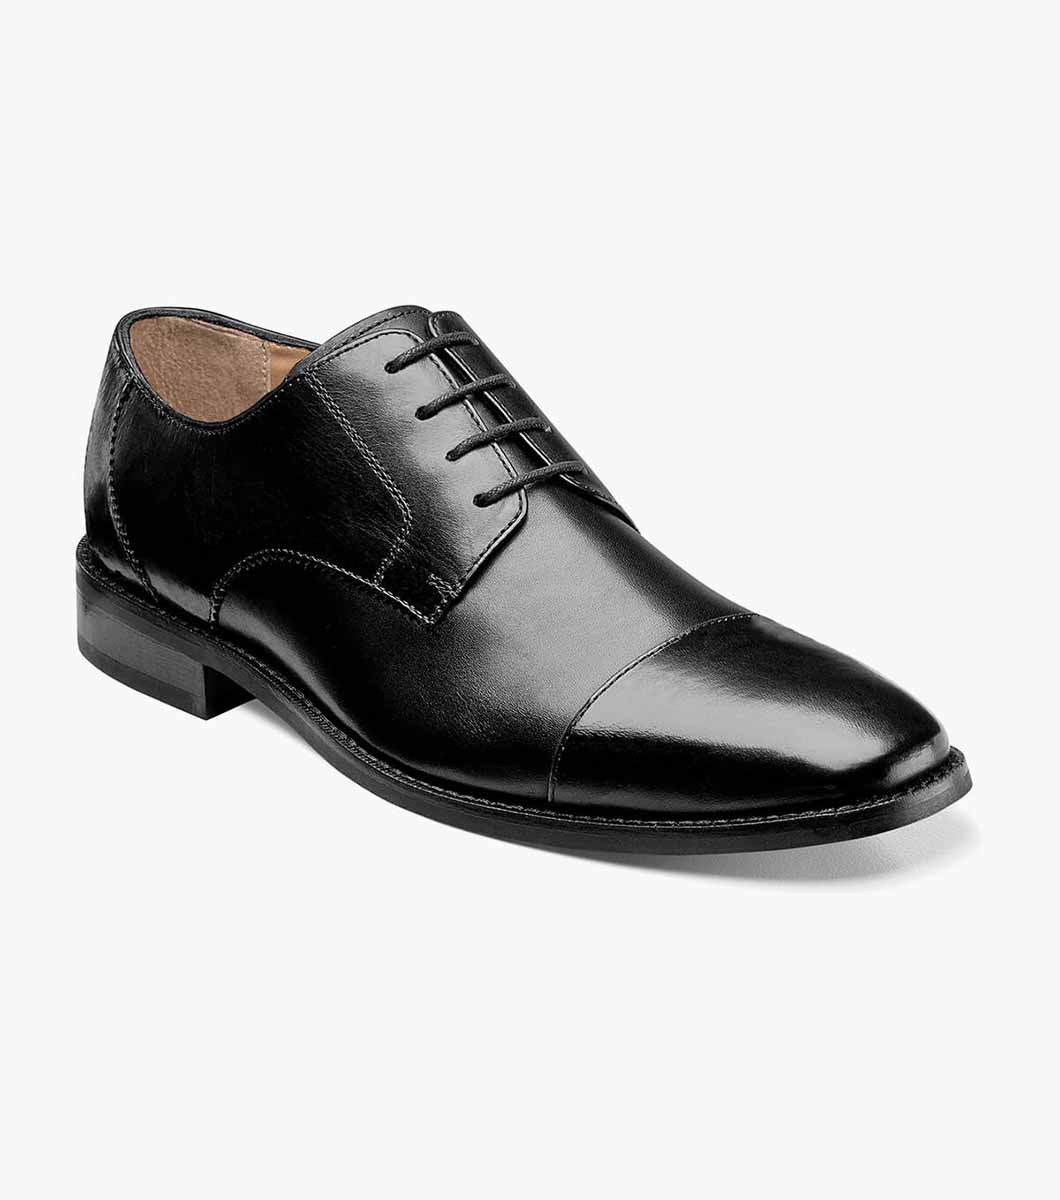 the oxford shoes